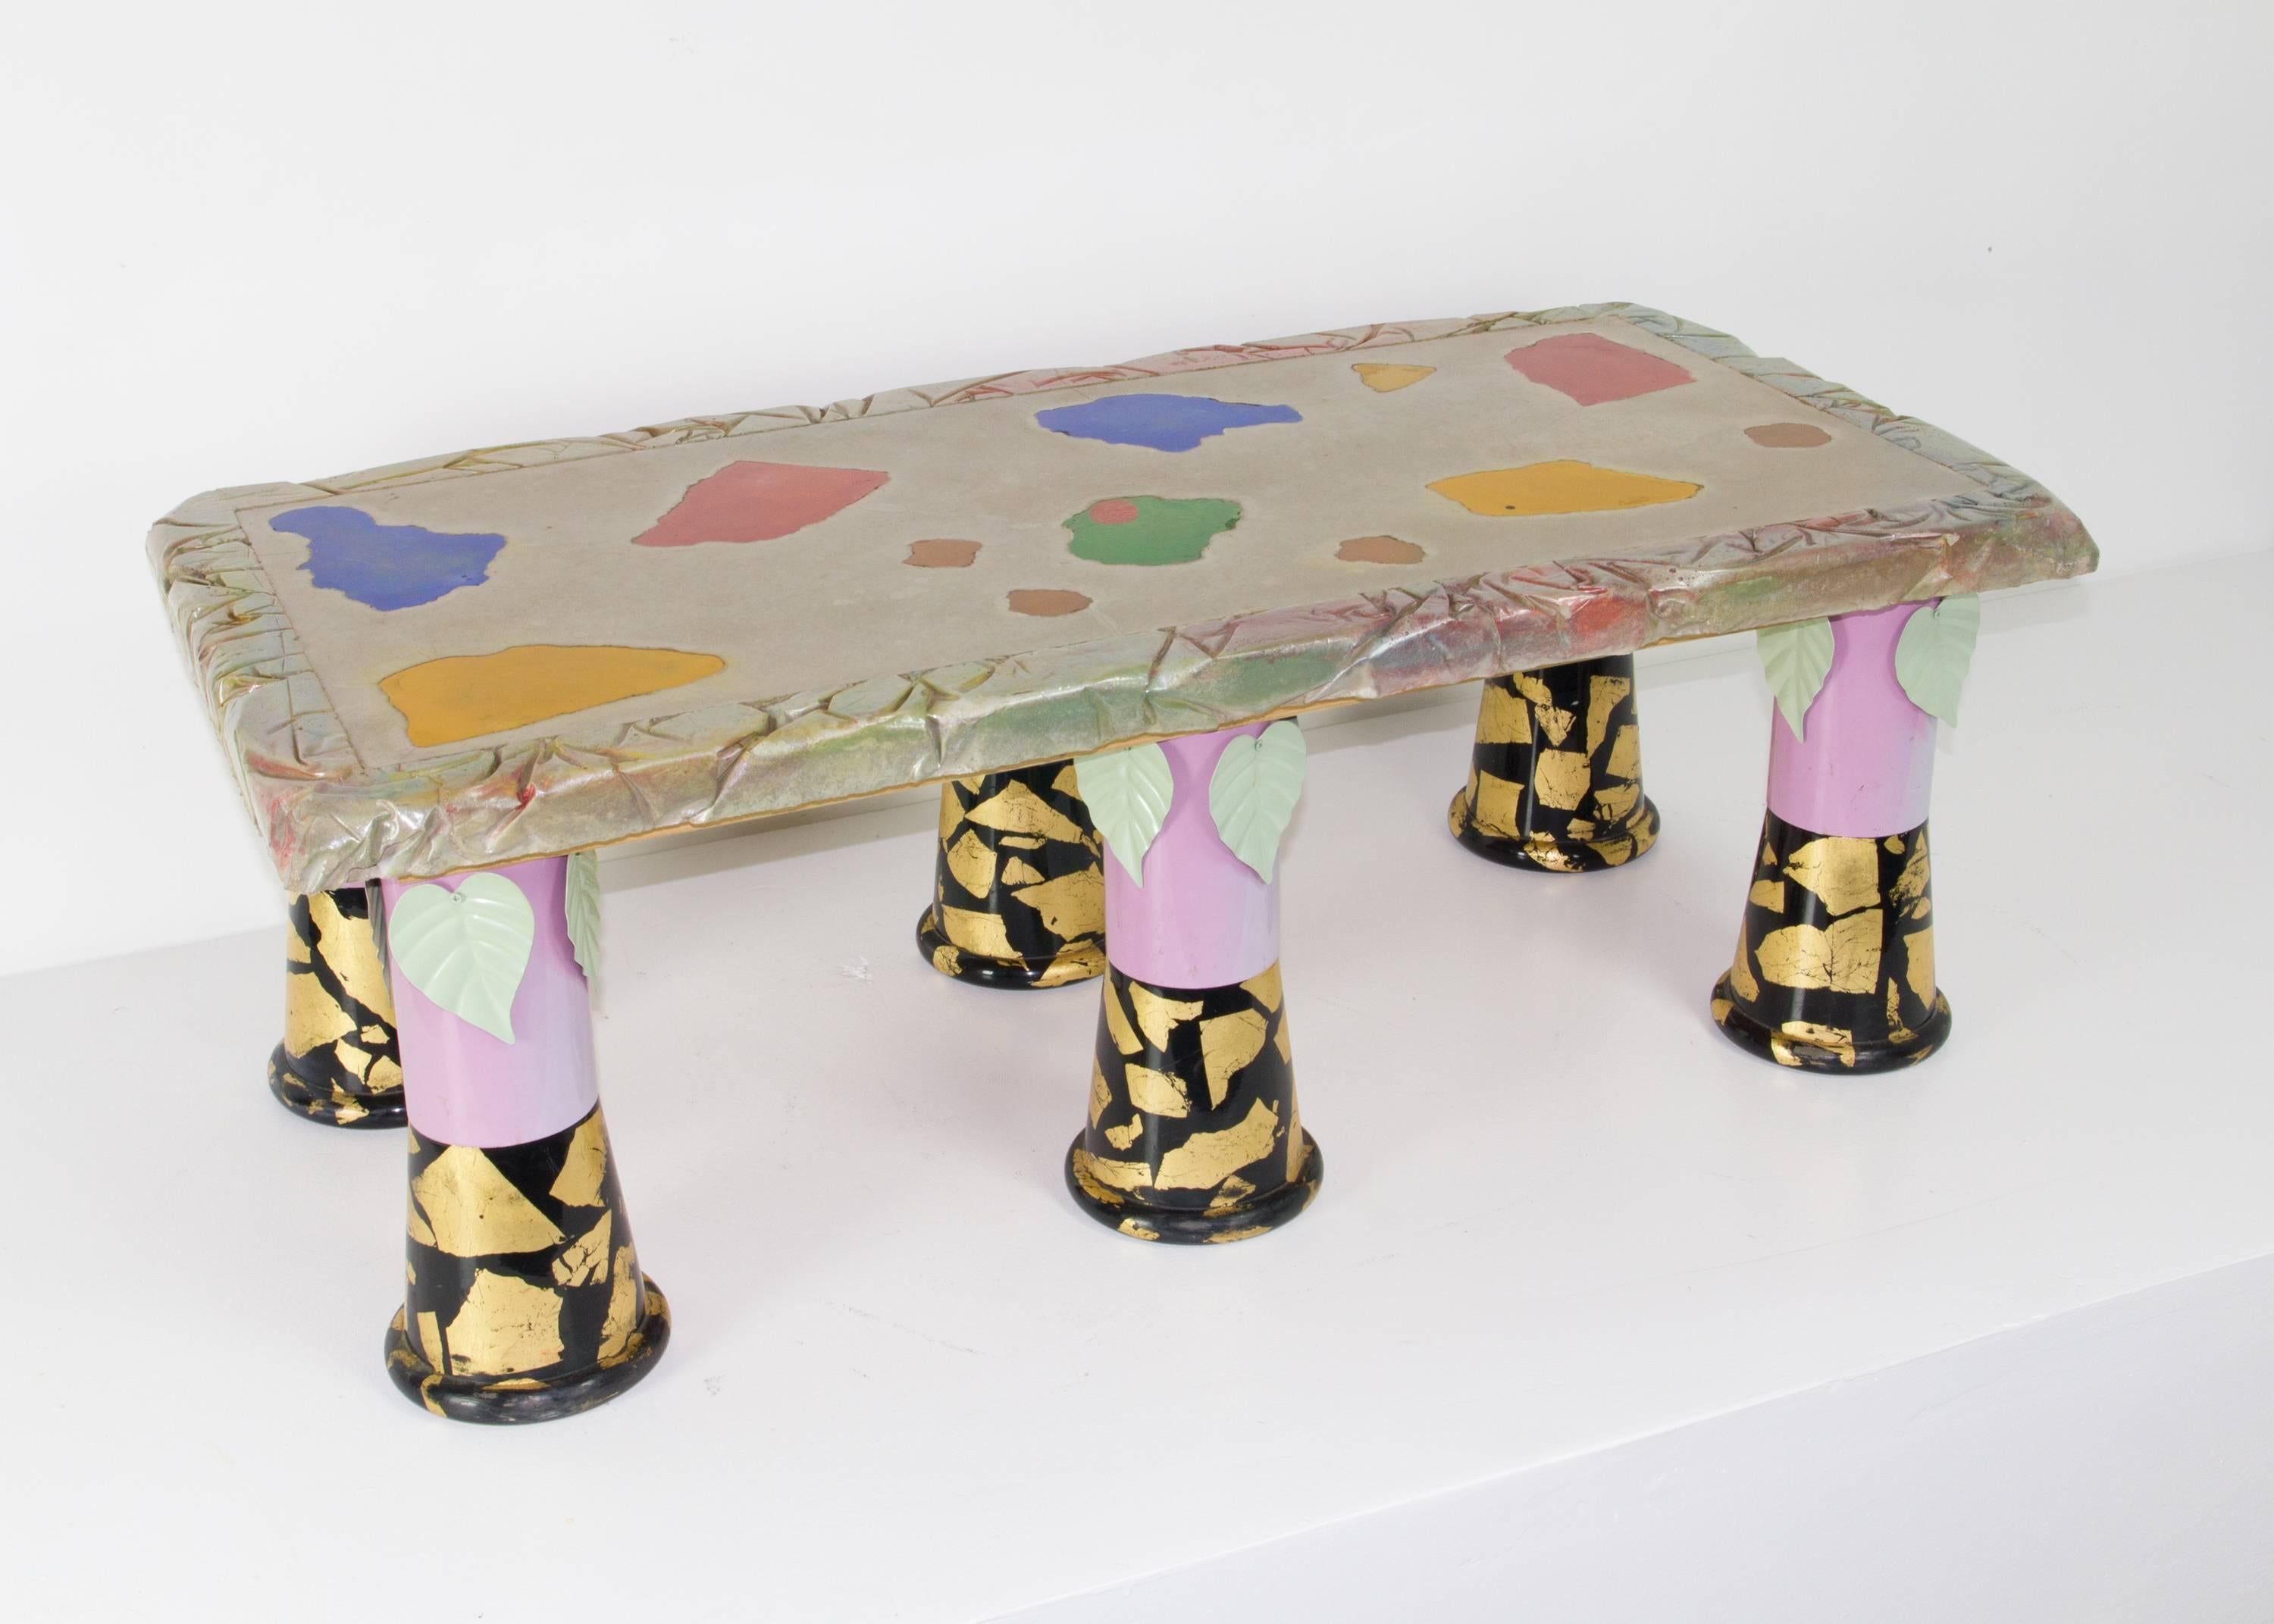 New to market, and previously unseen table by Carmen Spera, an important figure in the Downtown NYC art furniture scene as fostered by Art et Industrie. It features six painted and adorned metal legs supporting a substantial multi-textured cement